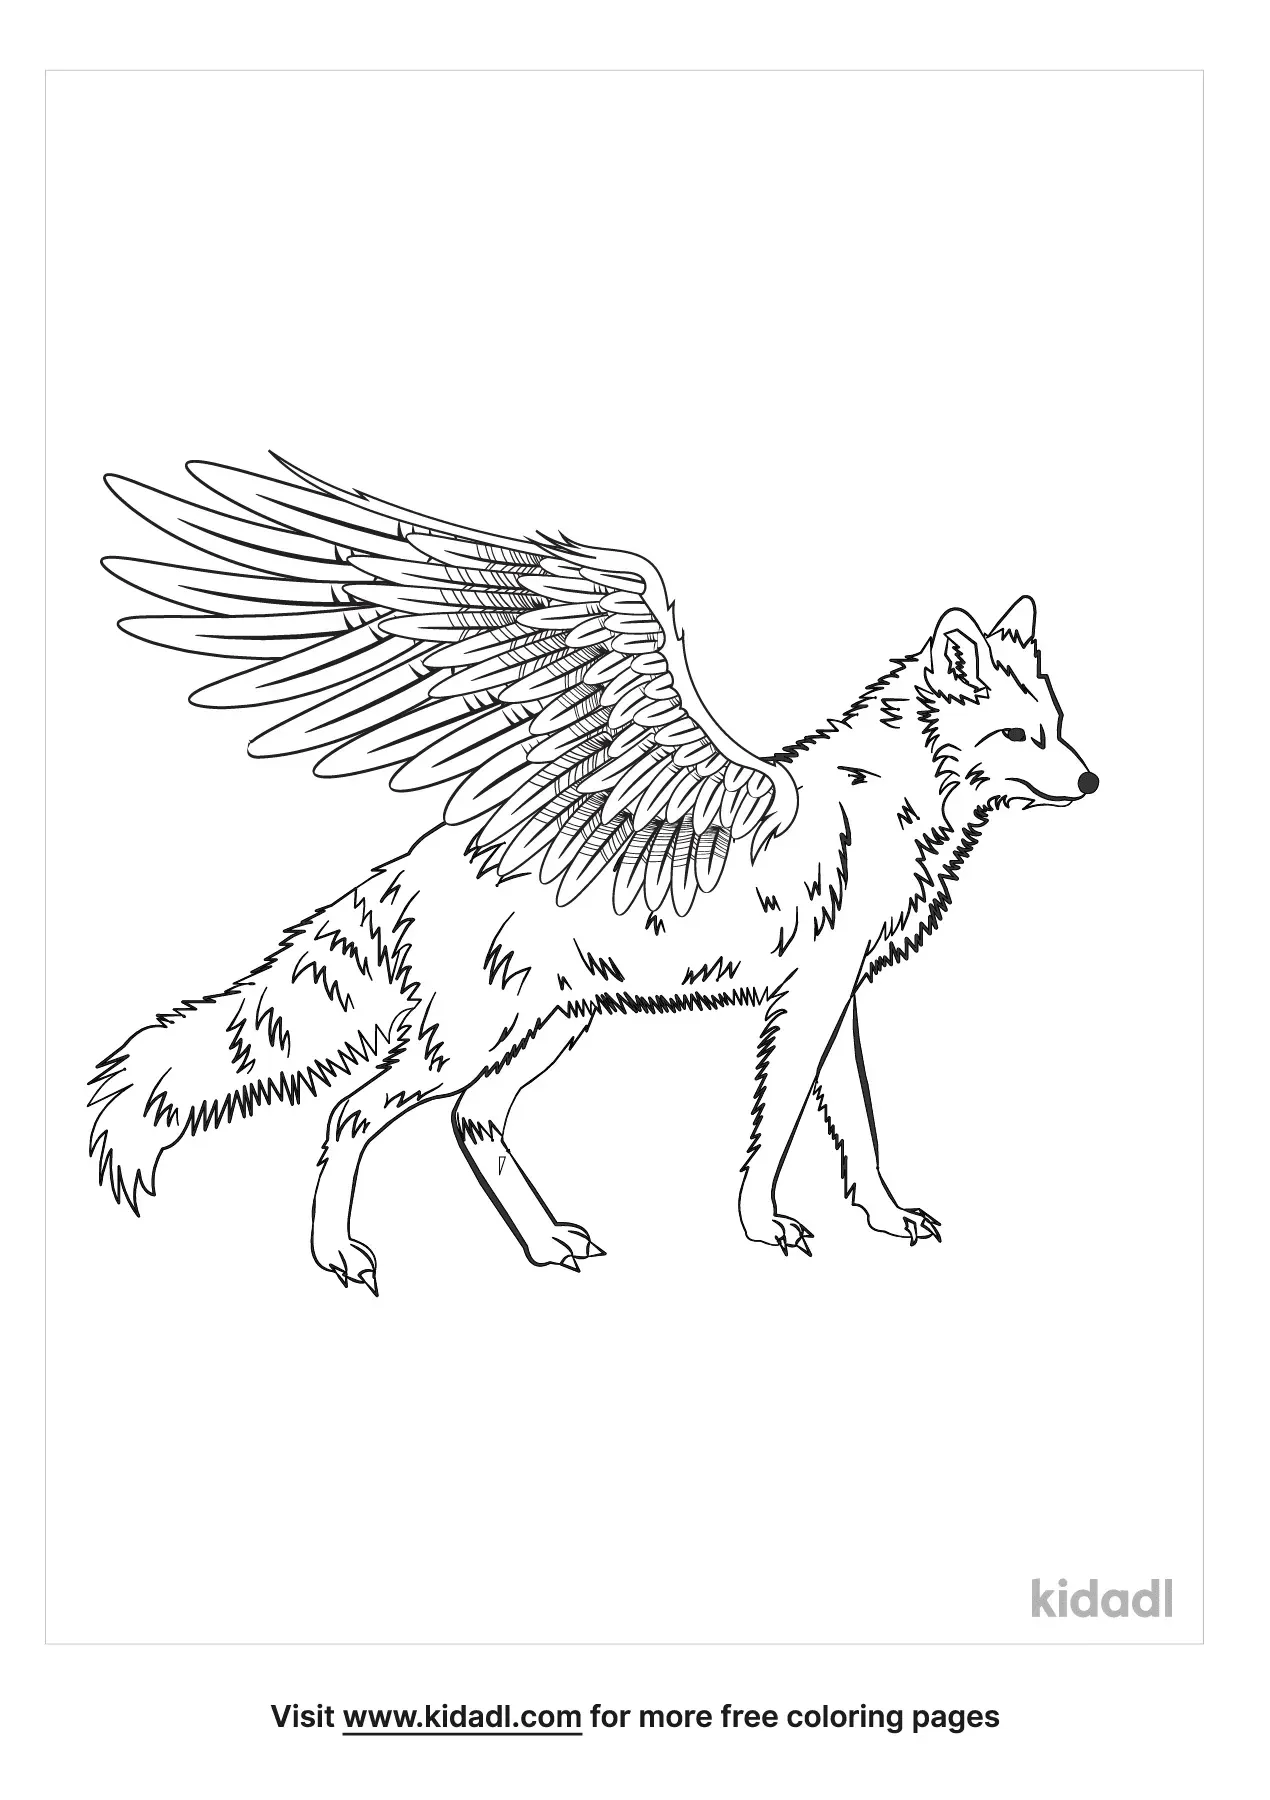 Free Winged Wolf Coloring Page | Coloring Page Printables | Kidadl